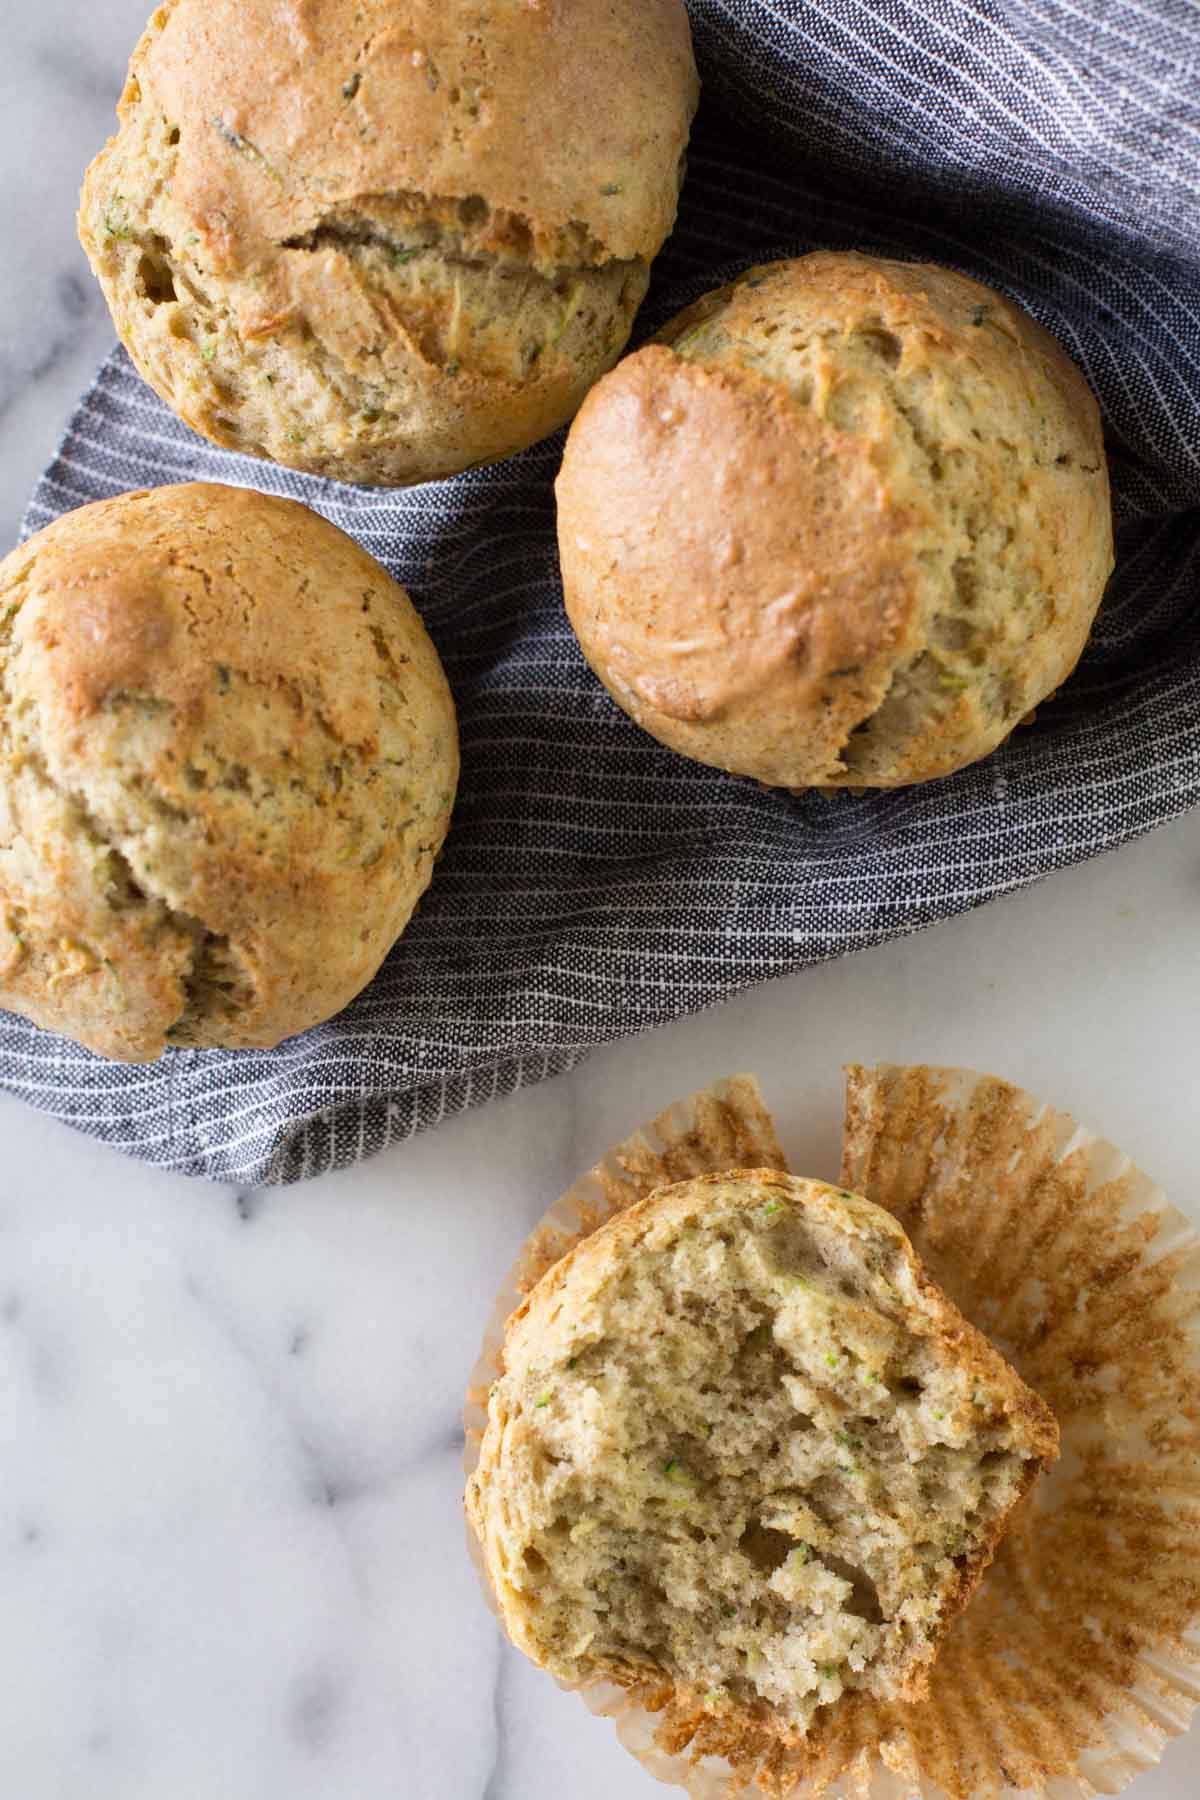 A half of a Healthier Zucchini Muffin sitting on its wrapper, with three more whole muffins sitting on a cloth napkin. 